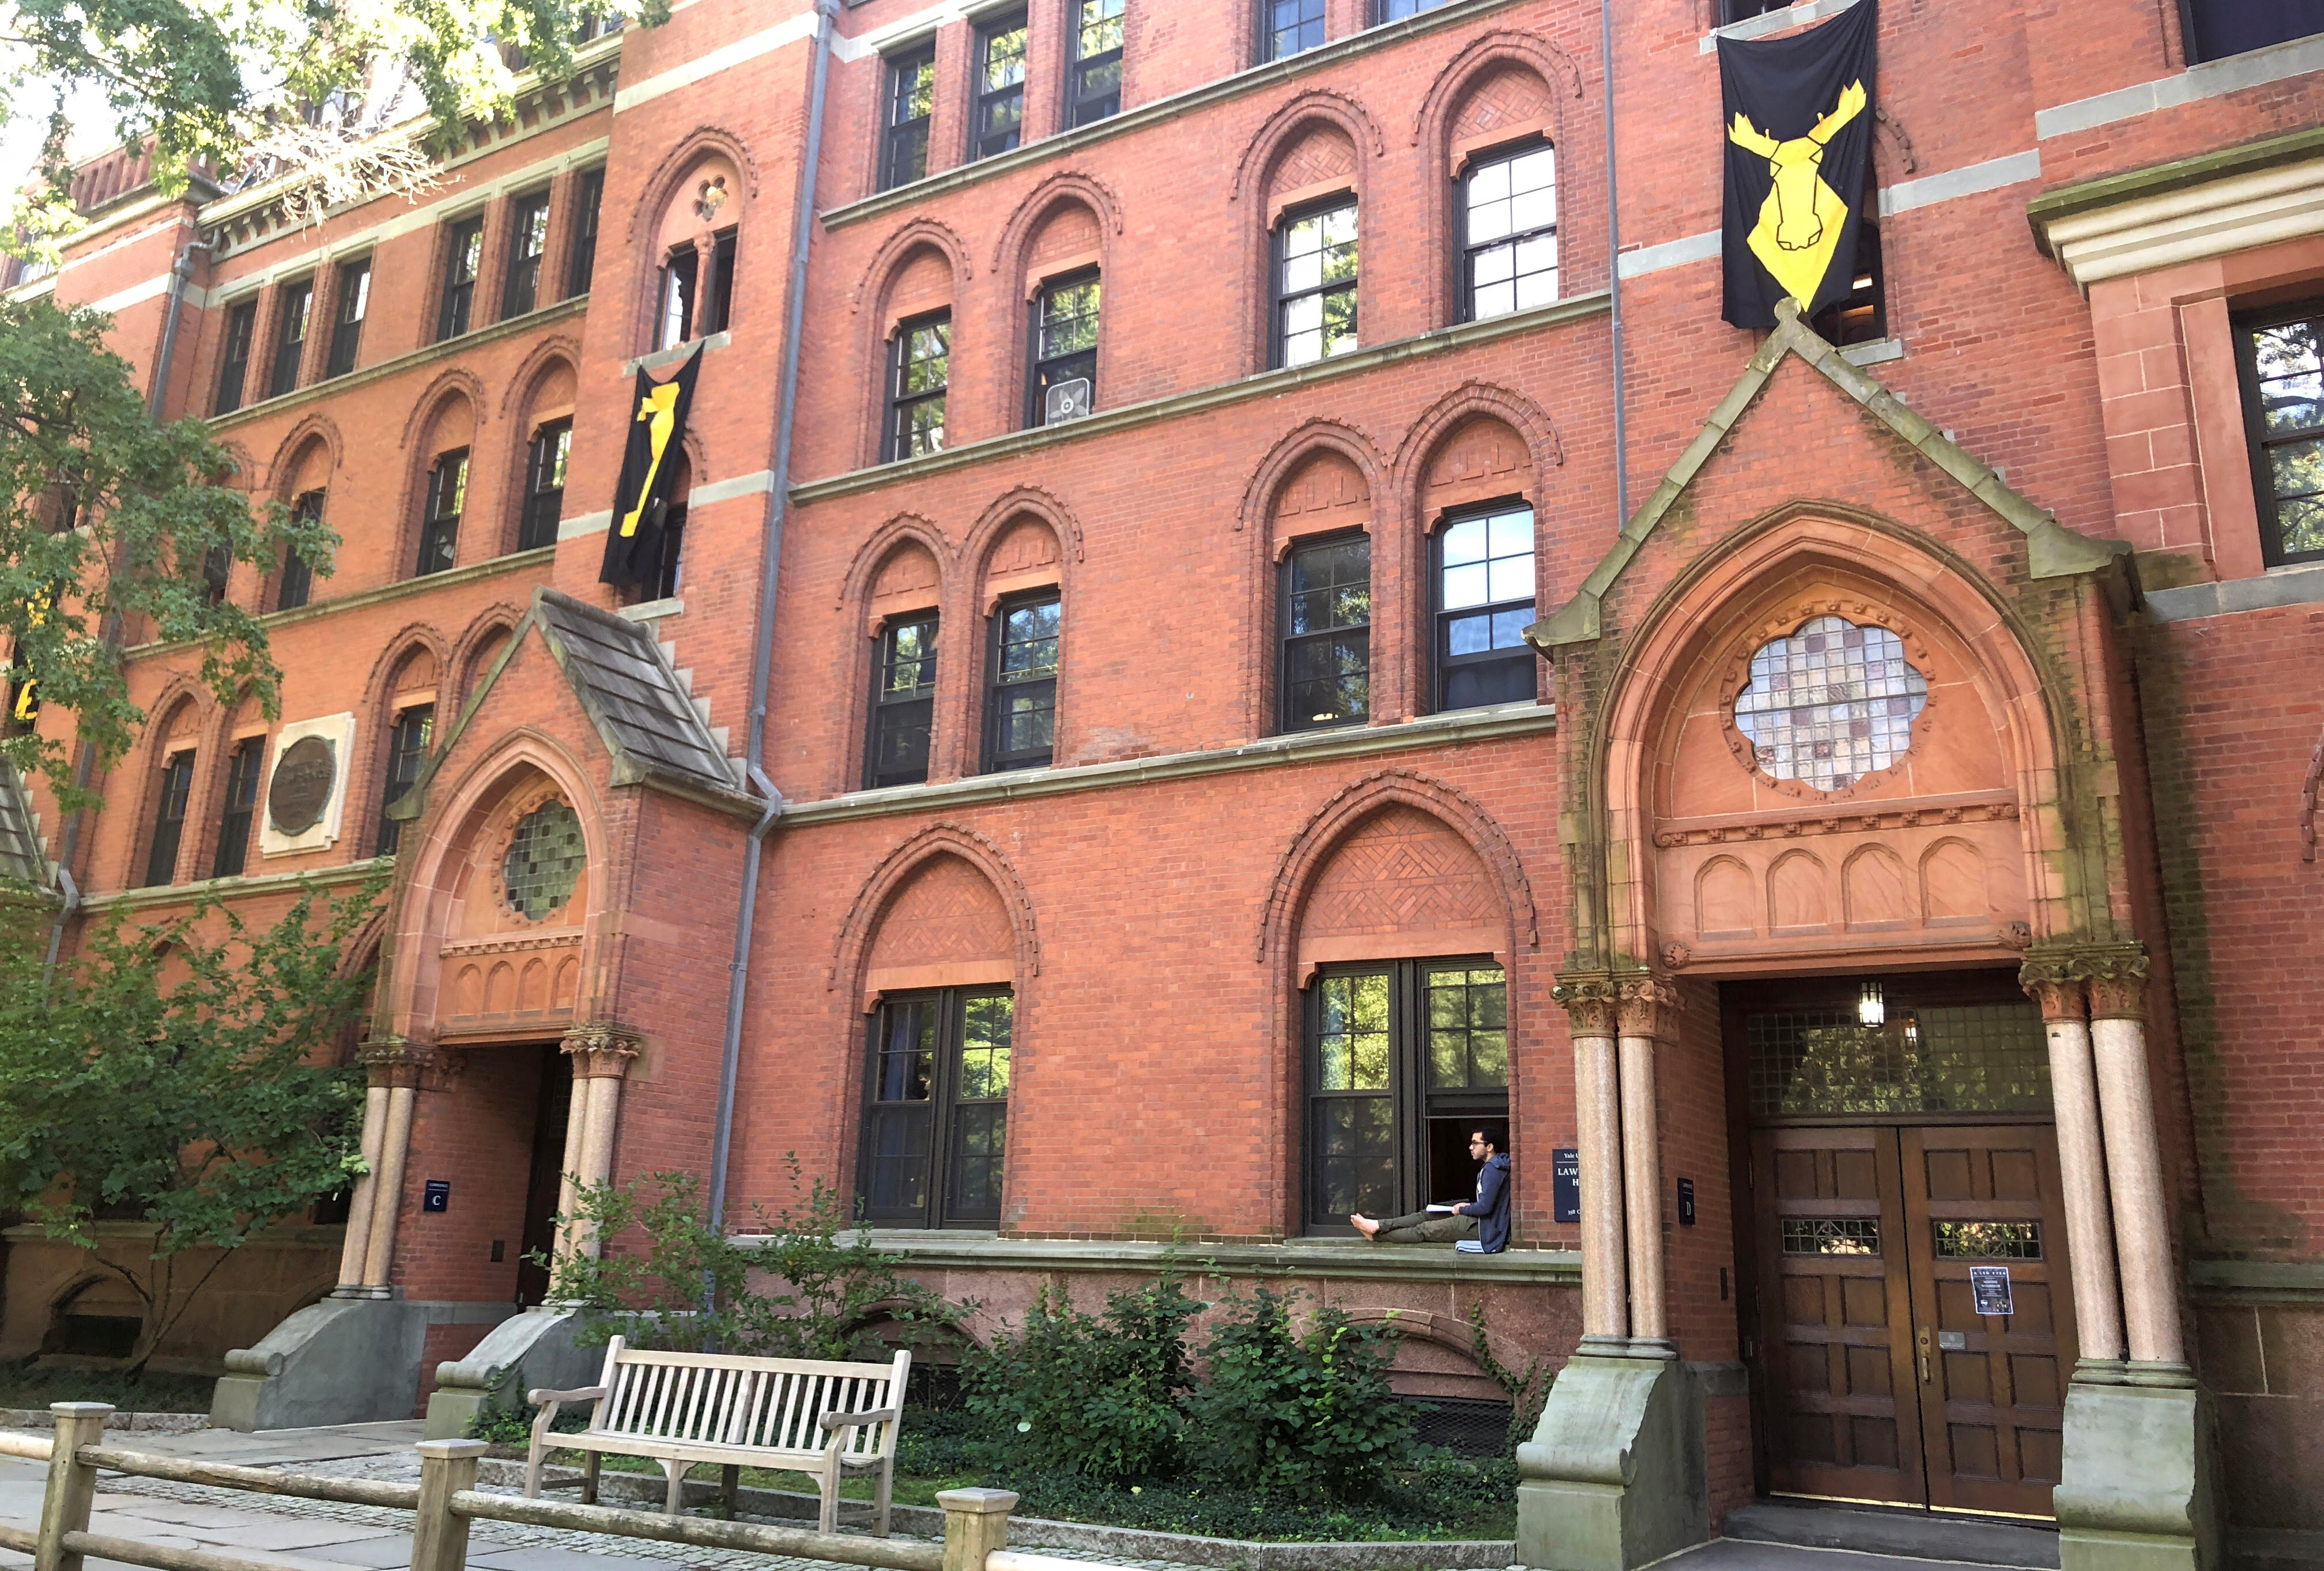 Lawrance Hall is shown at Yale University in New Haven